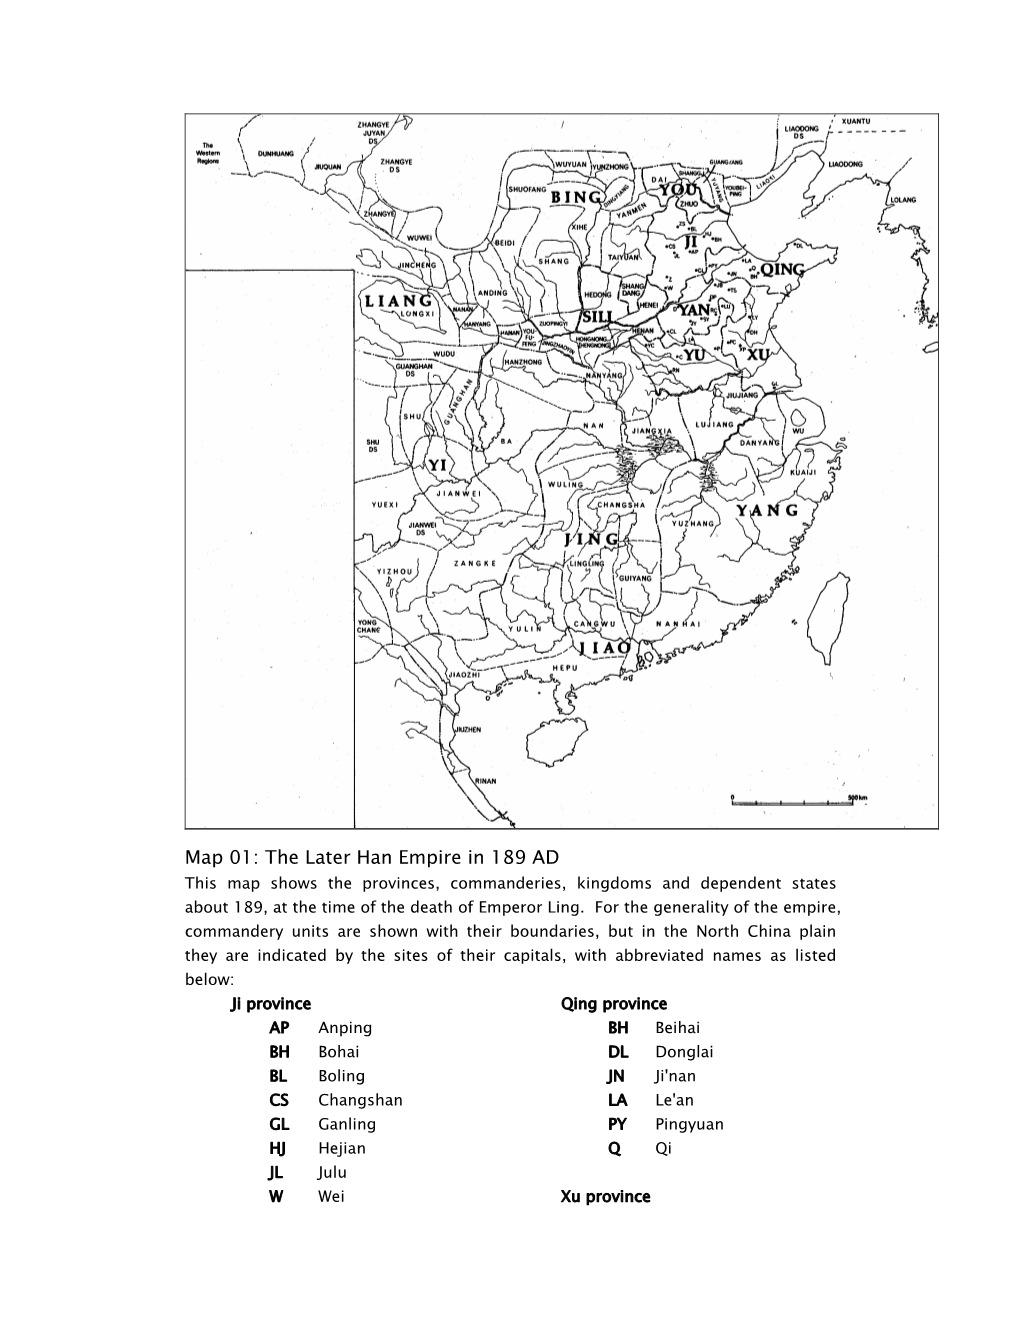 Map 01: the Later Han Empire in 189 AD This Map Shows the Provinces, Commanderies, Kingdoms and Dependent States About 189, at the Time of the Death of Emperor Ling